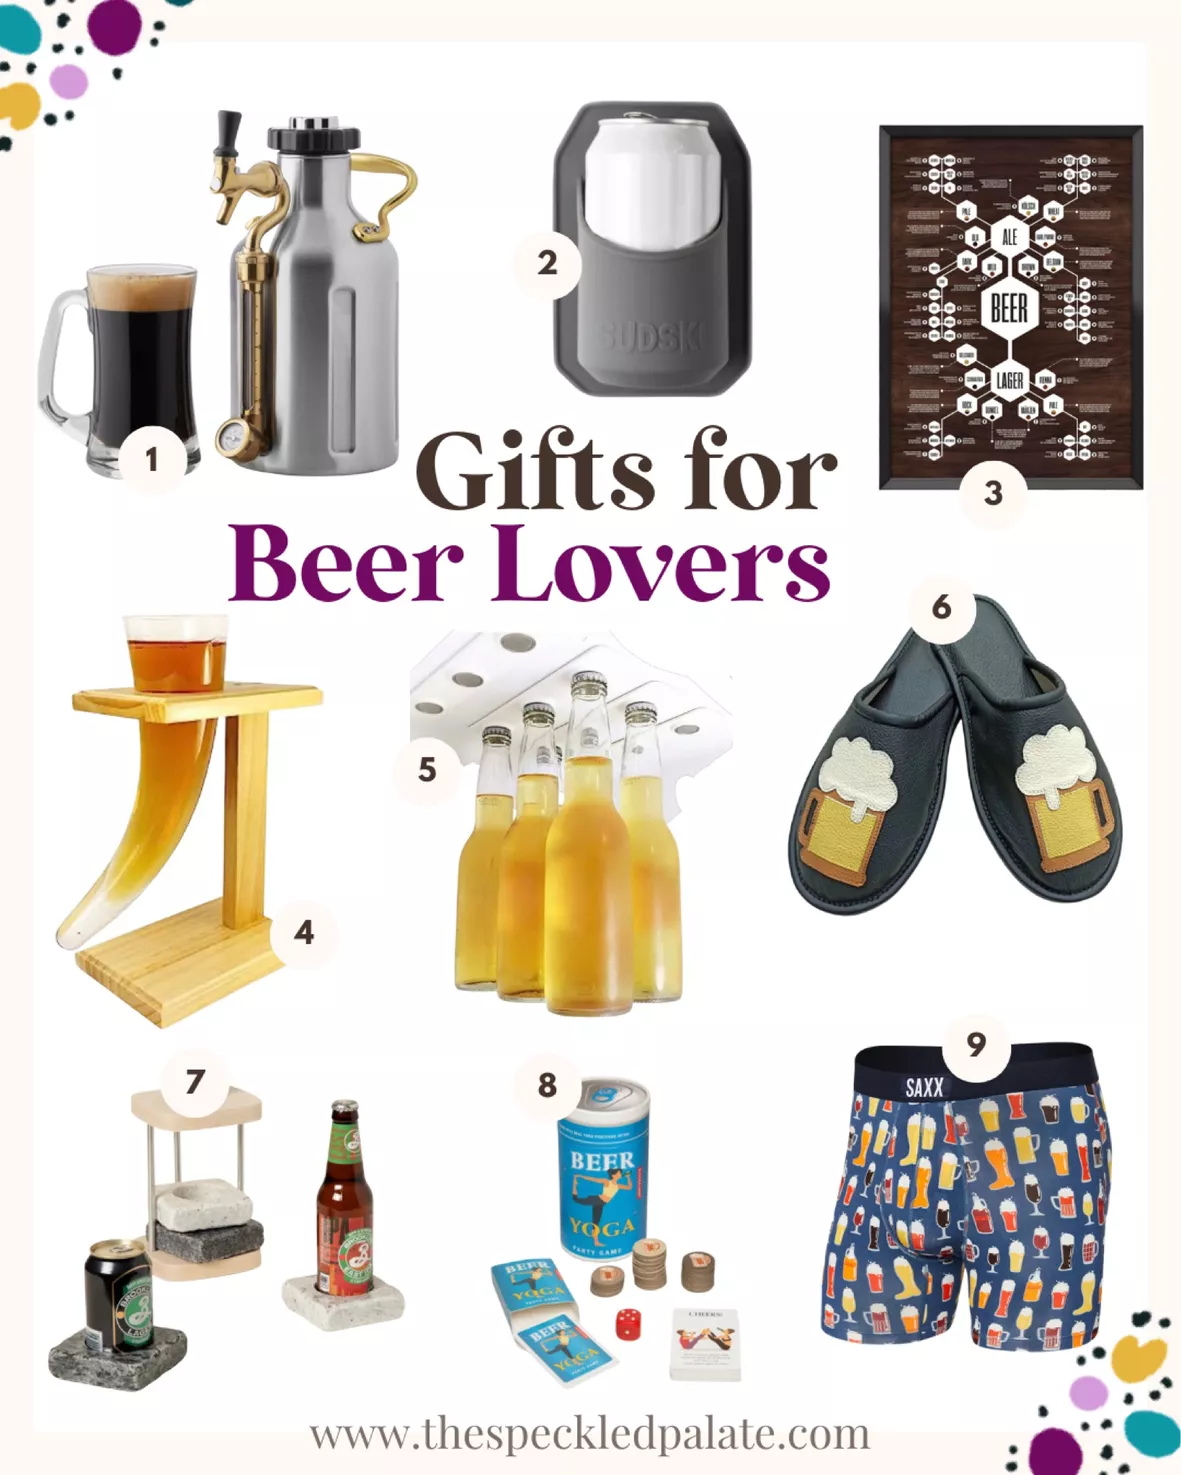 Beer Gifts, Curated Gifts For Beer Lovers